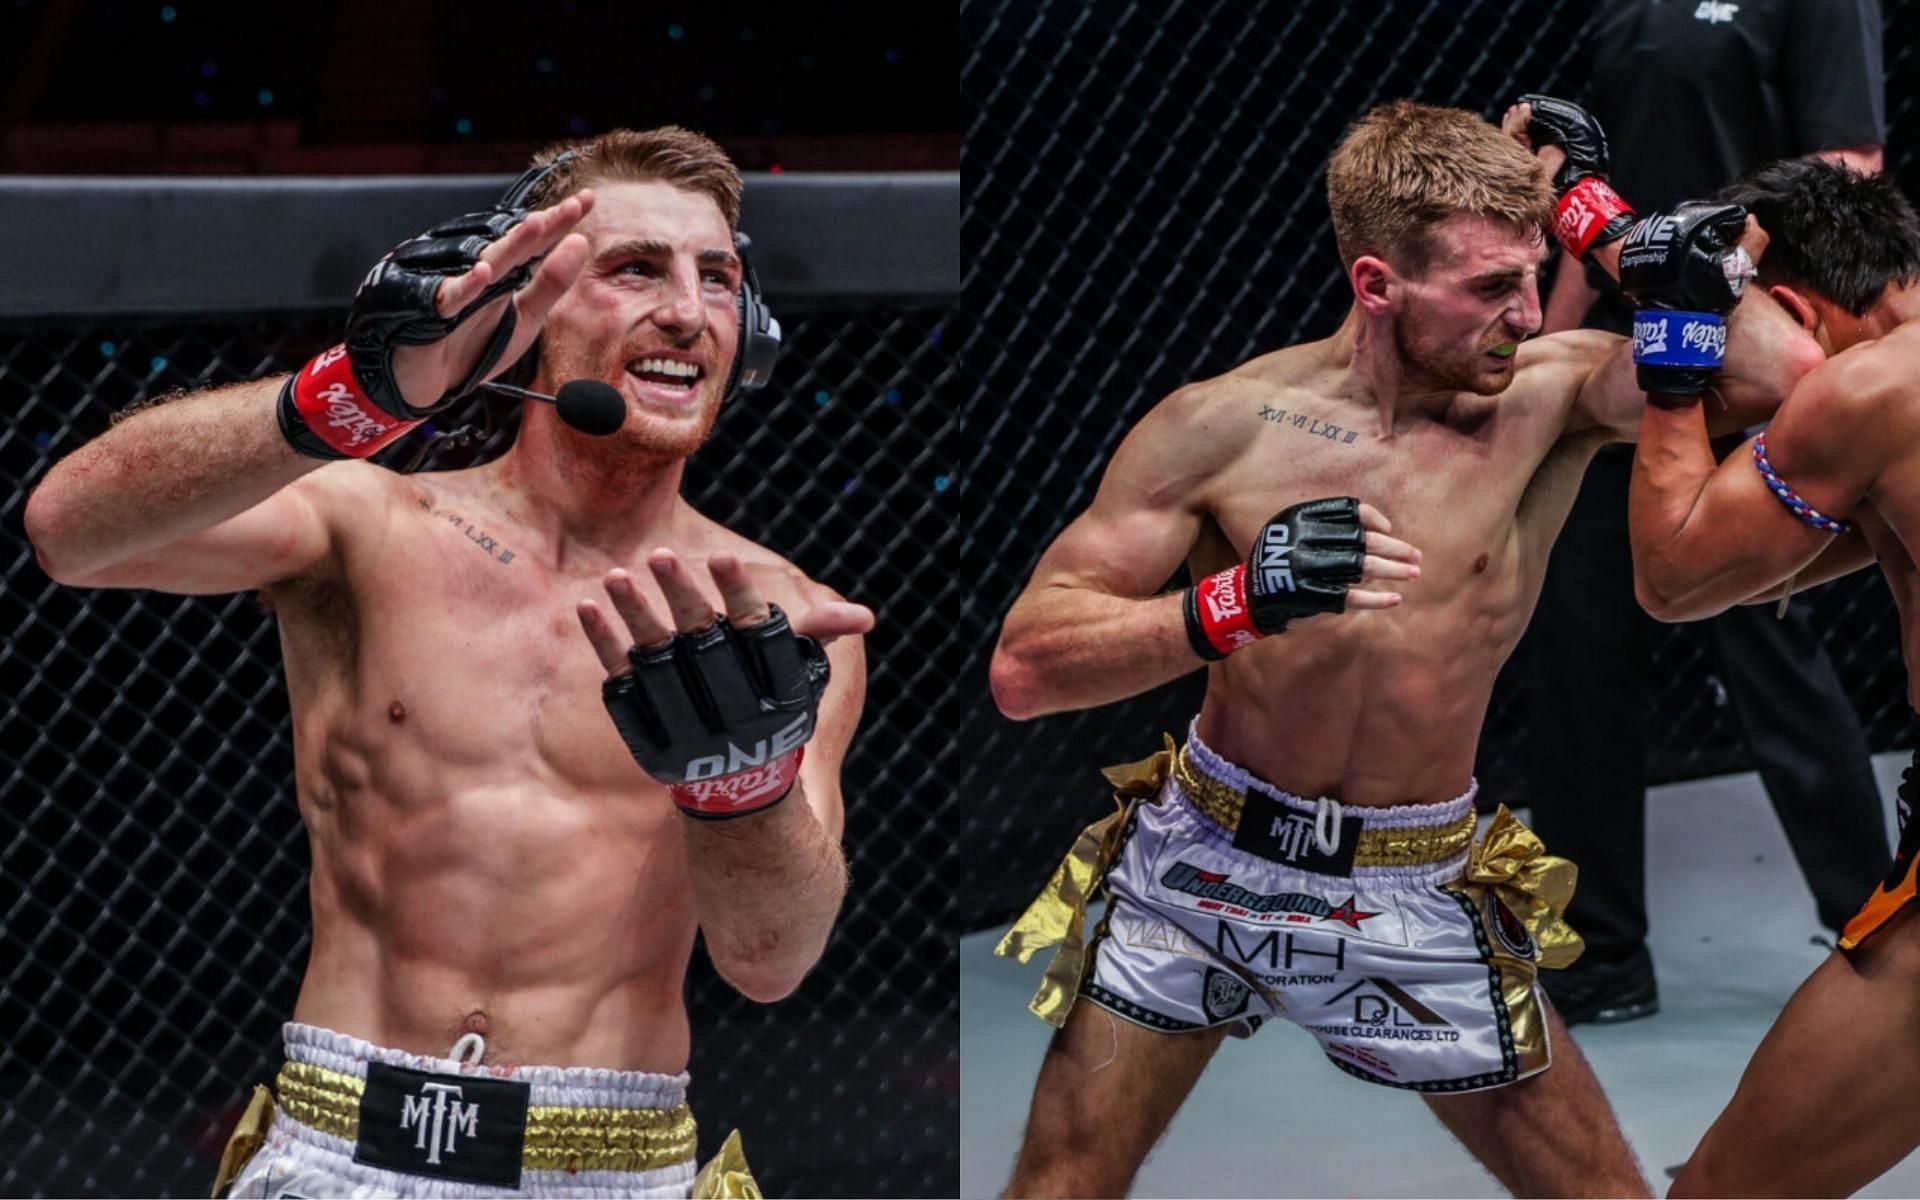 Former ONE flyweight Muay Thai champ Jonathan Haggerty aims for a double bonus at ONE 157. (Images courtesy of ONE Championship)